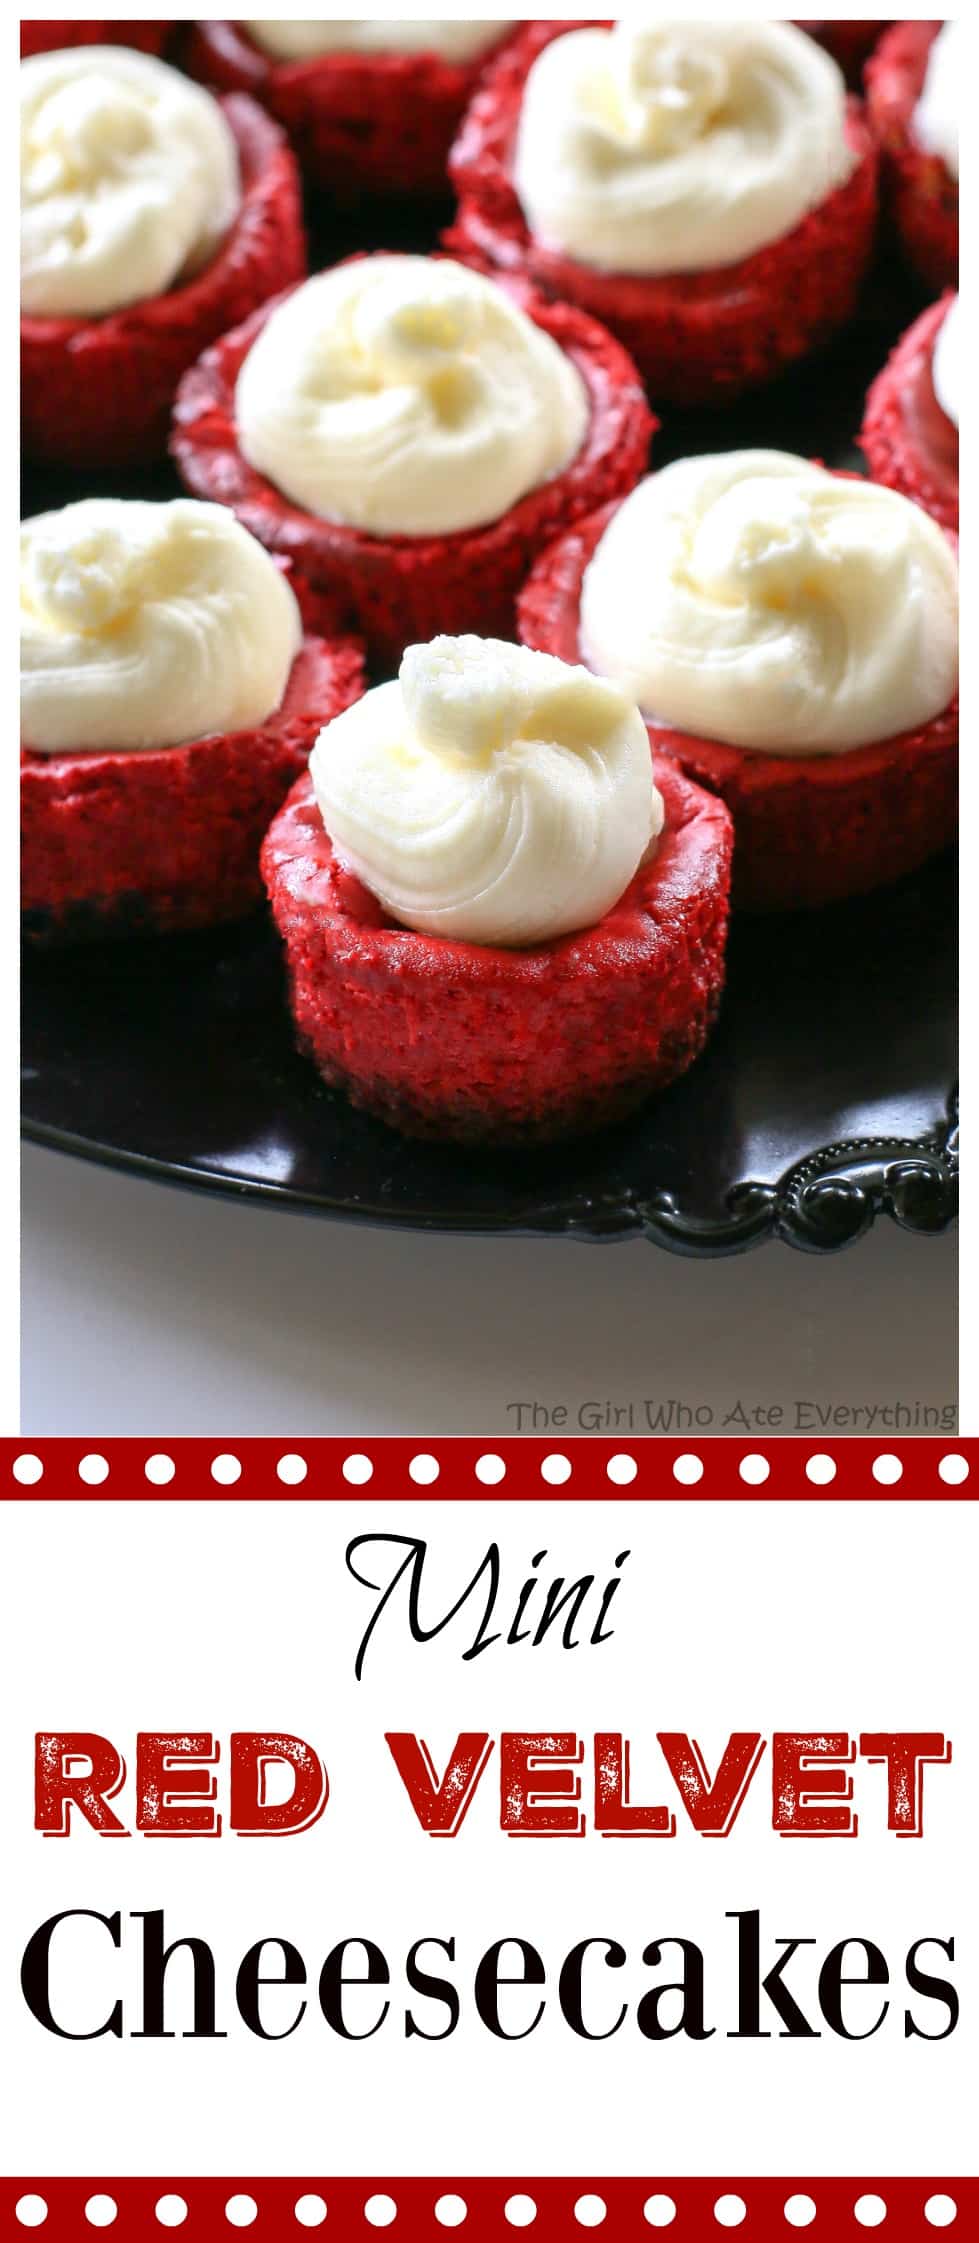 Mini Red Velvet Cheesecakes with an Oreo crust! #christmas #dessert #red #velvet #cheesecakes